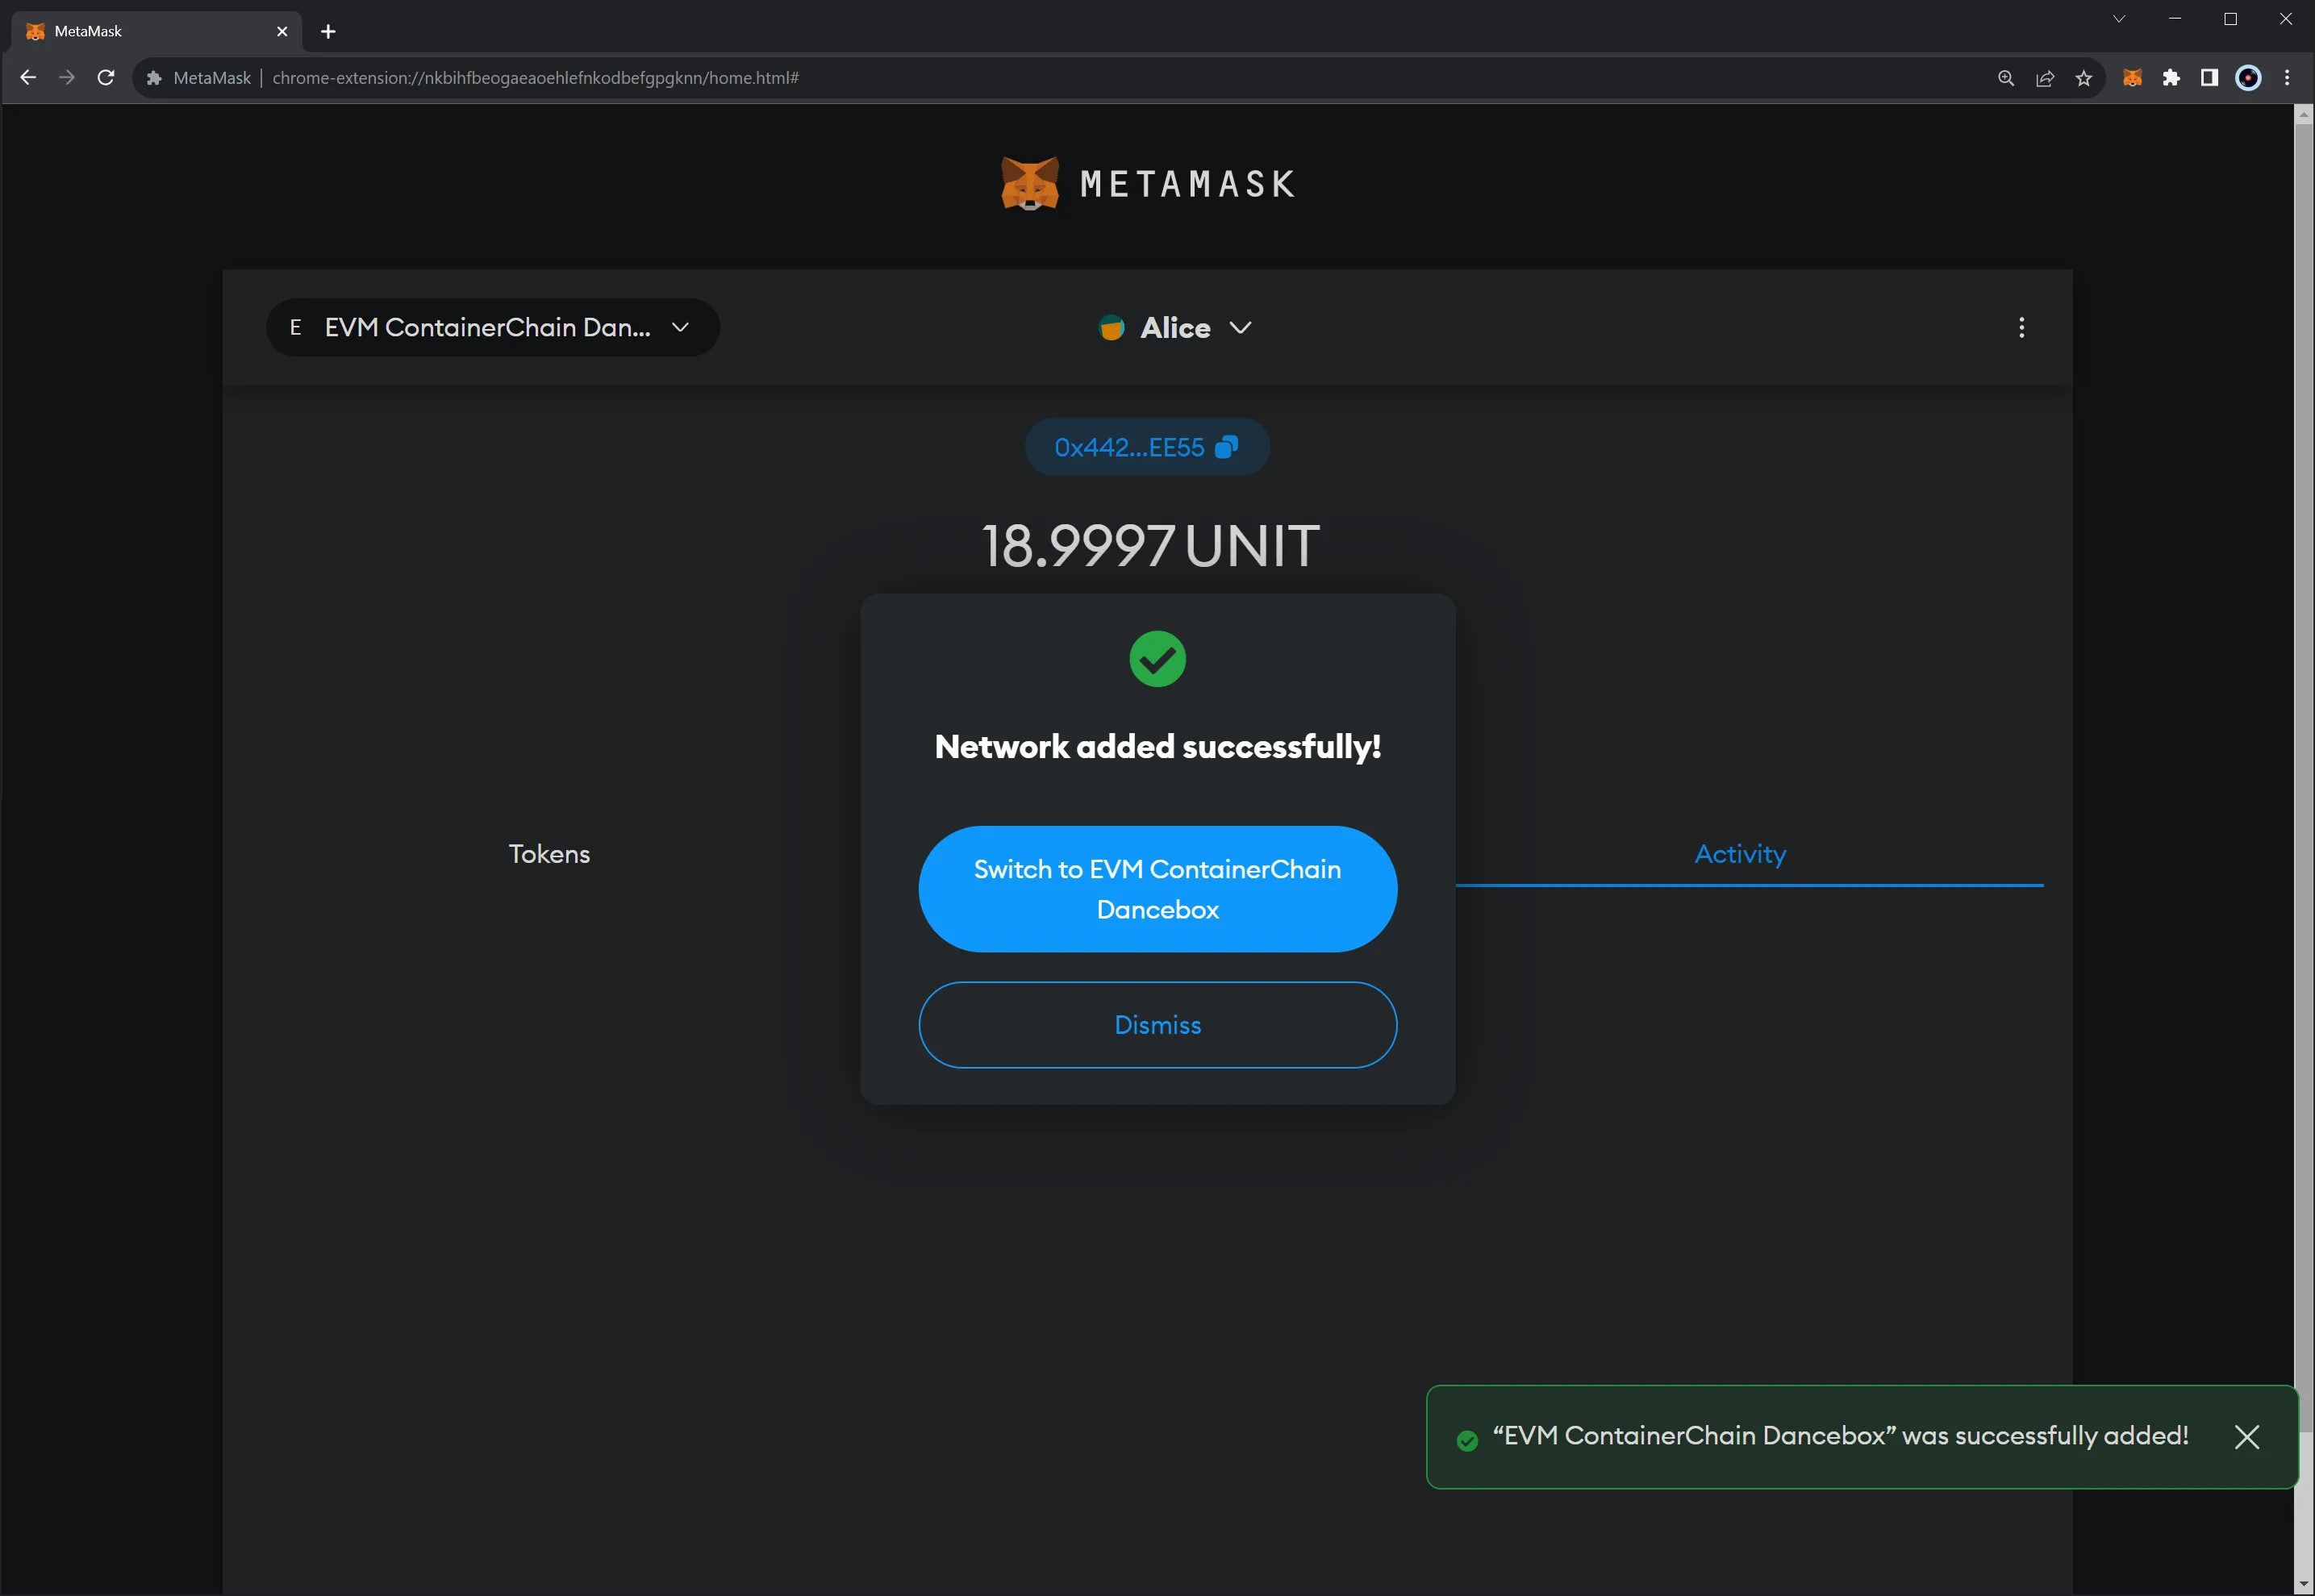 Successfully added a network in Metamask